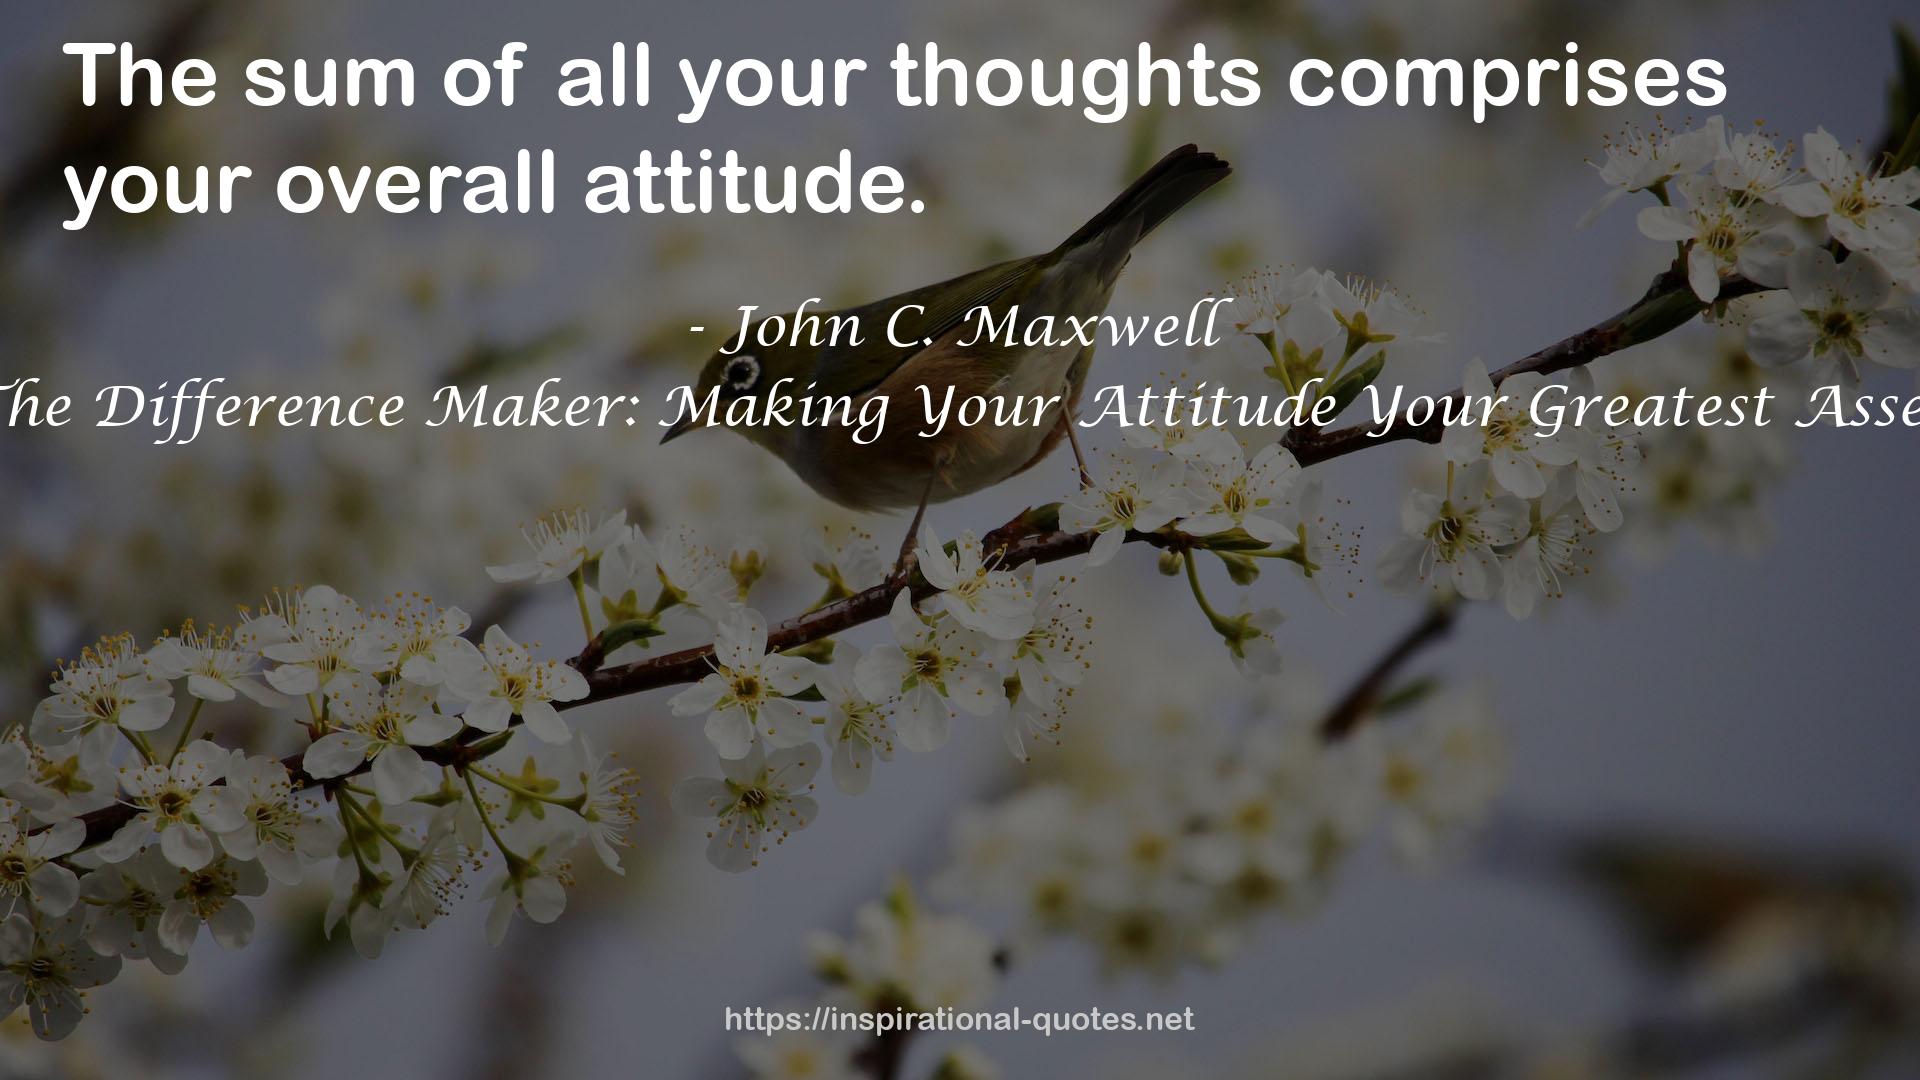 The Difference Maker: Making Your Attitude Your Greatest Asset QUOTES